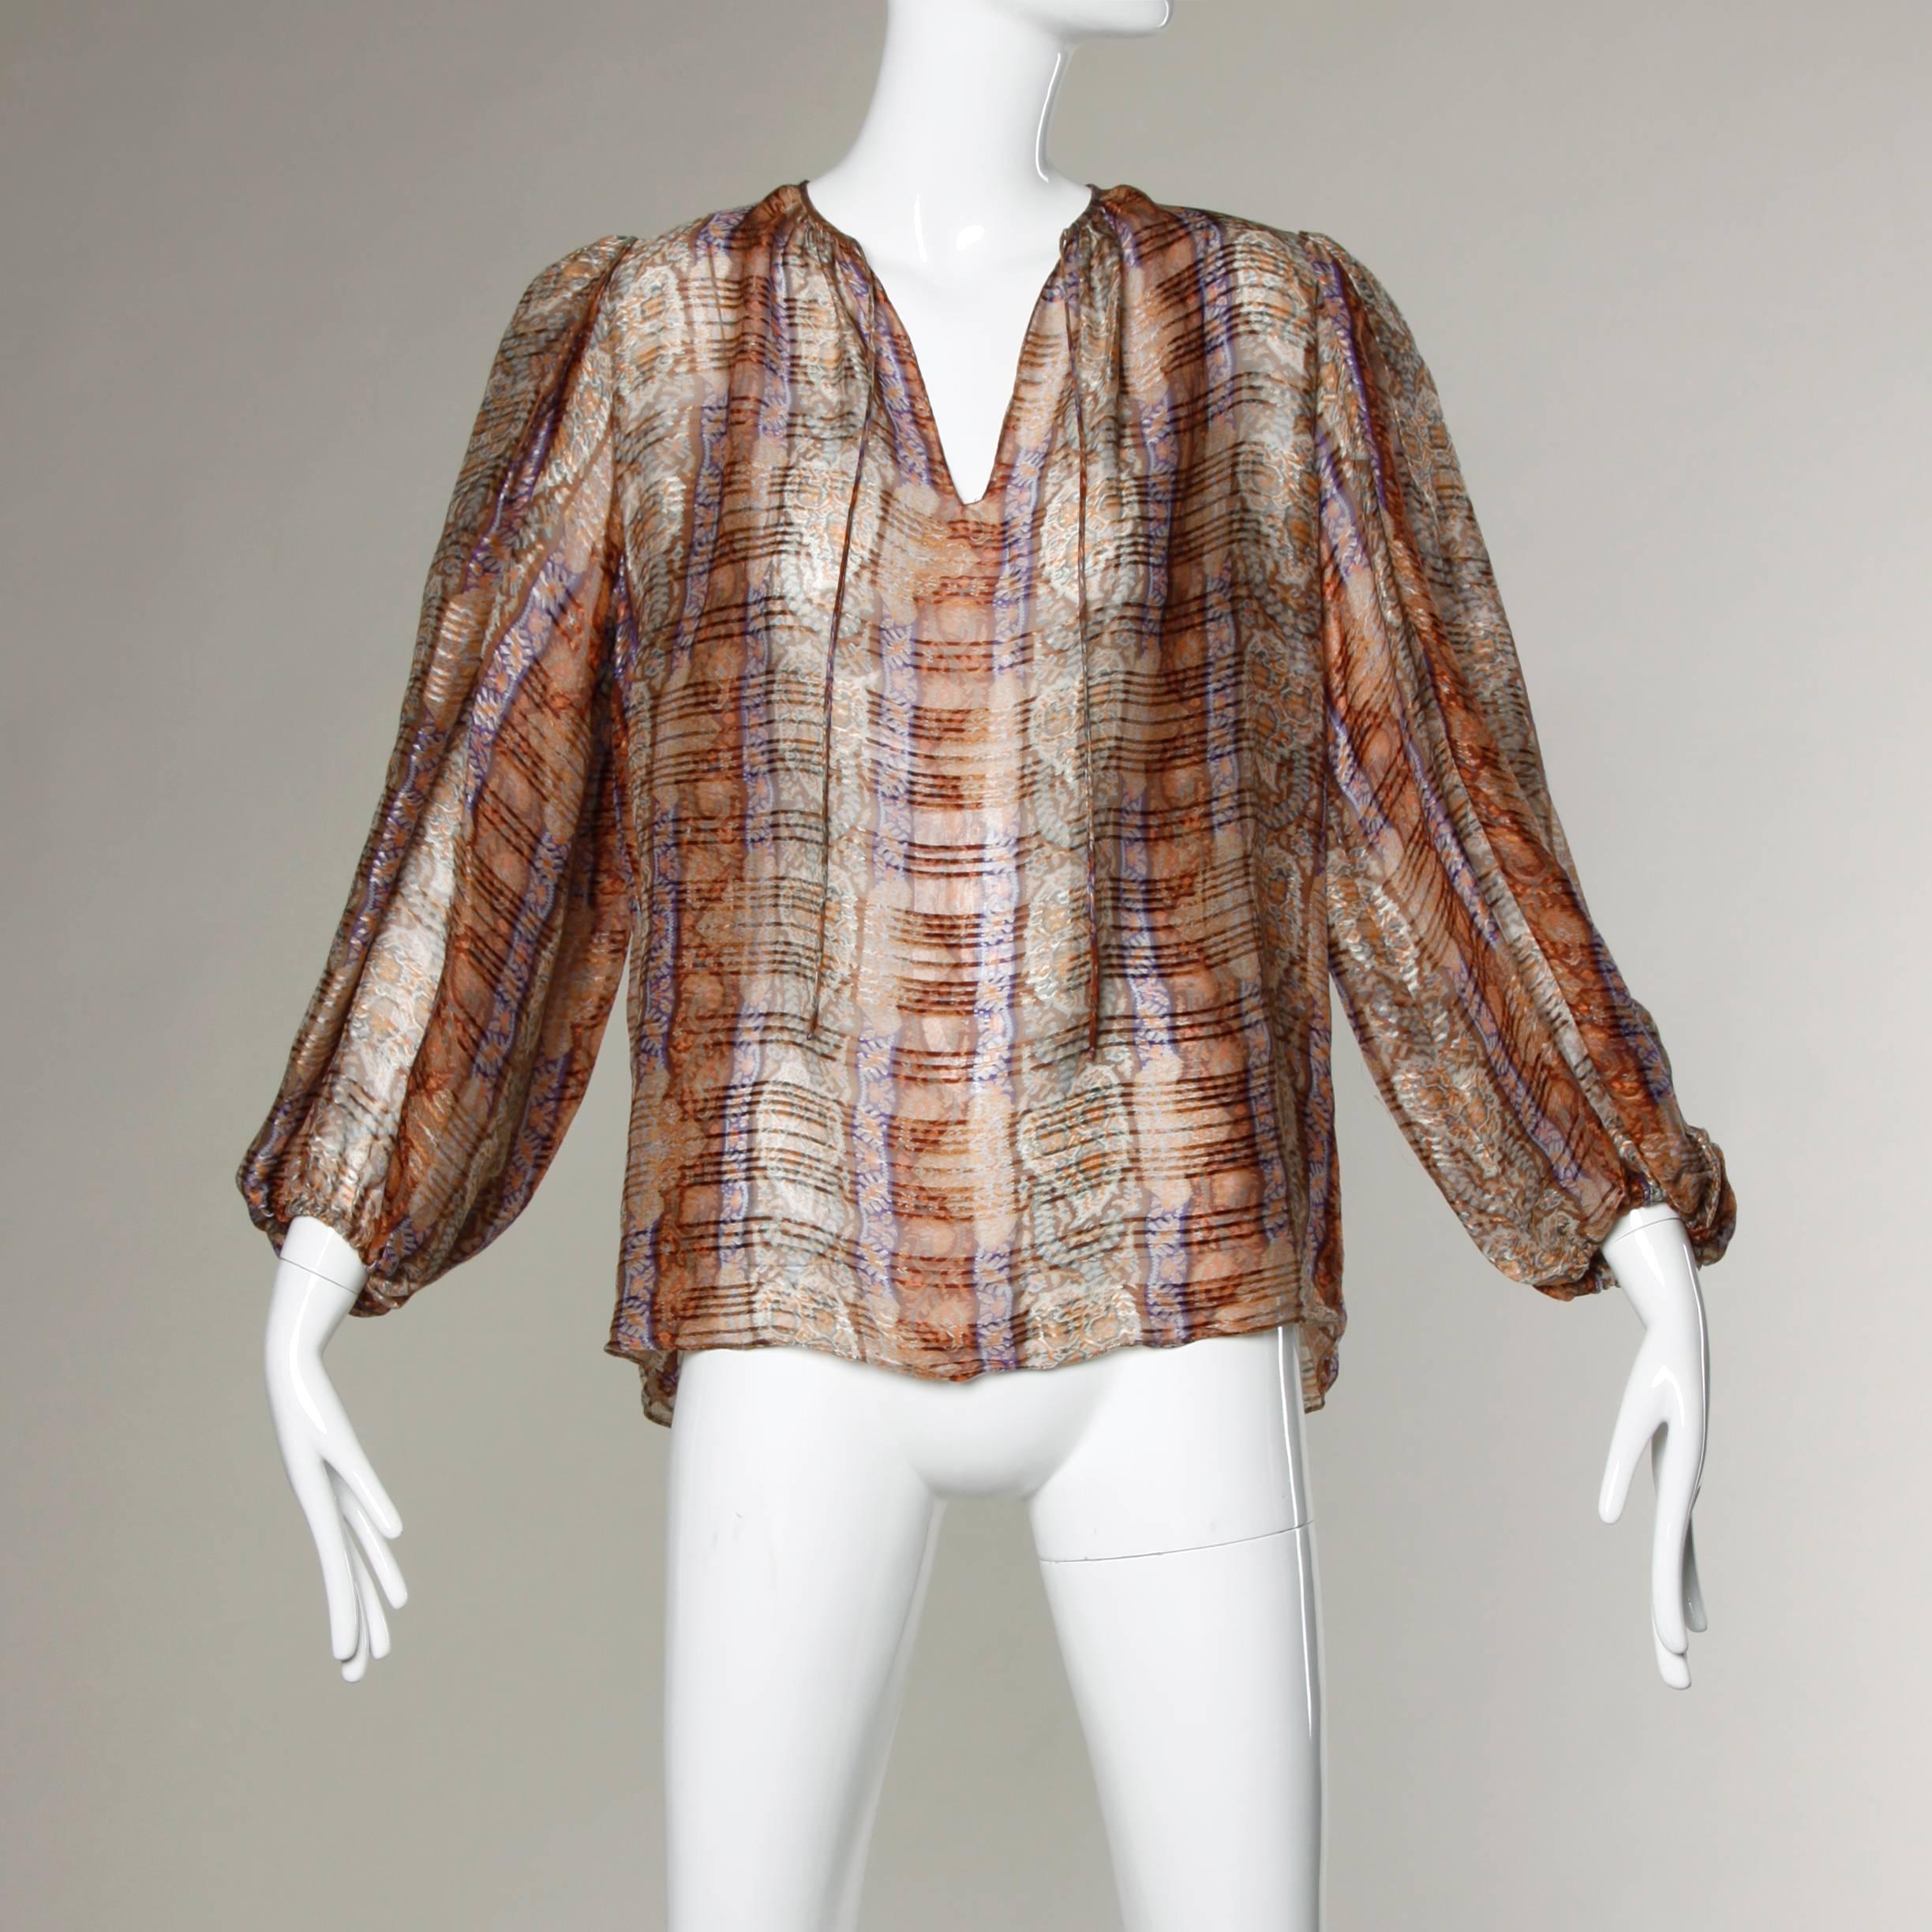 Stunning paper thin sheer printed silk blouse with full balloon sleeves. This has the look and feel of a Pauline Trigere blouse but there is only the Frances Heffernan brand label.

Details:

Unlined
No Closure
Marked Size: Not